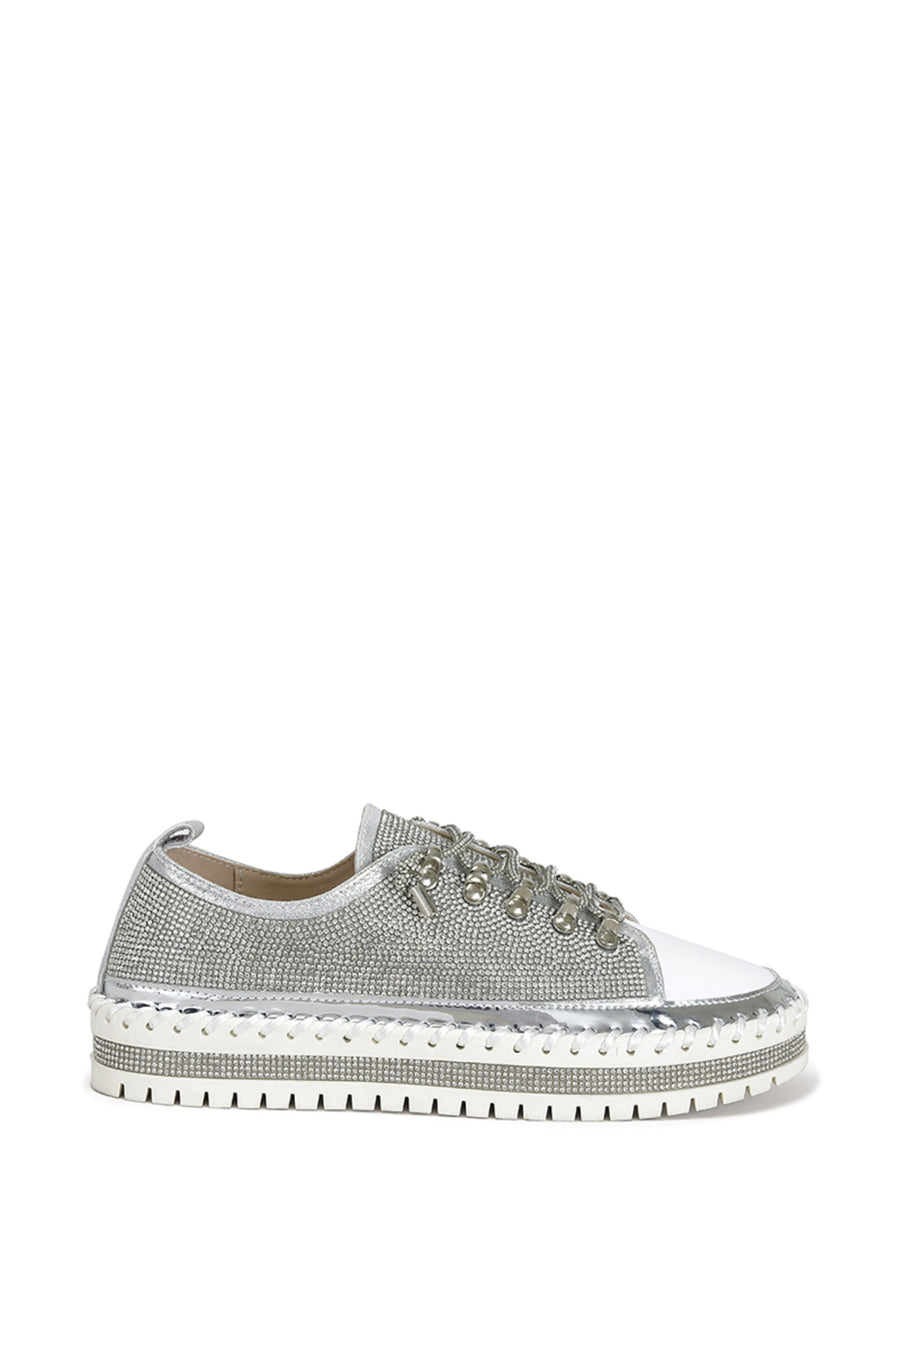 metallic silver lace up sneakers witha chunky white platform sole and crystal embellishments all over the upper